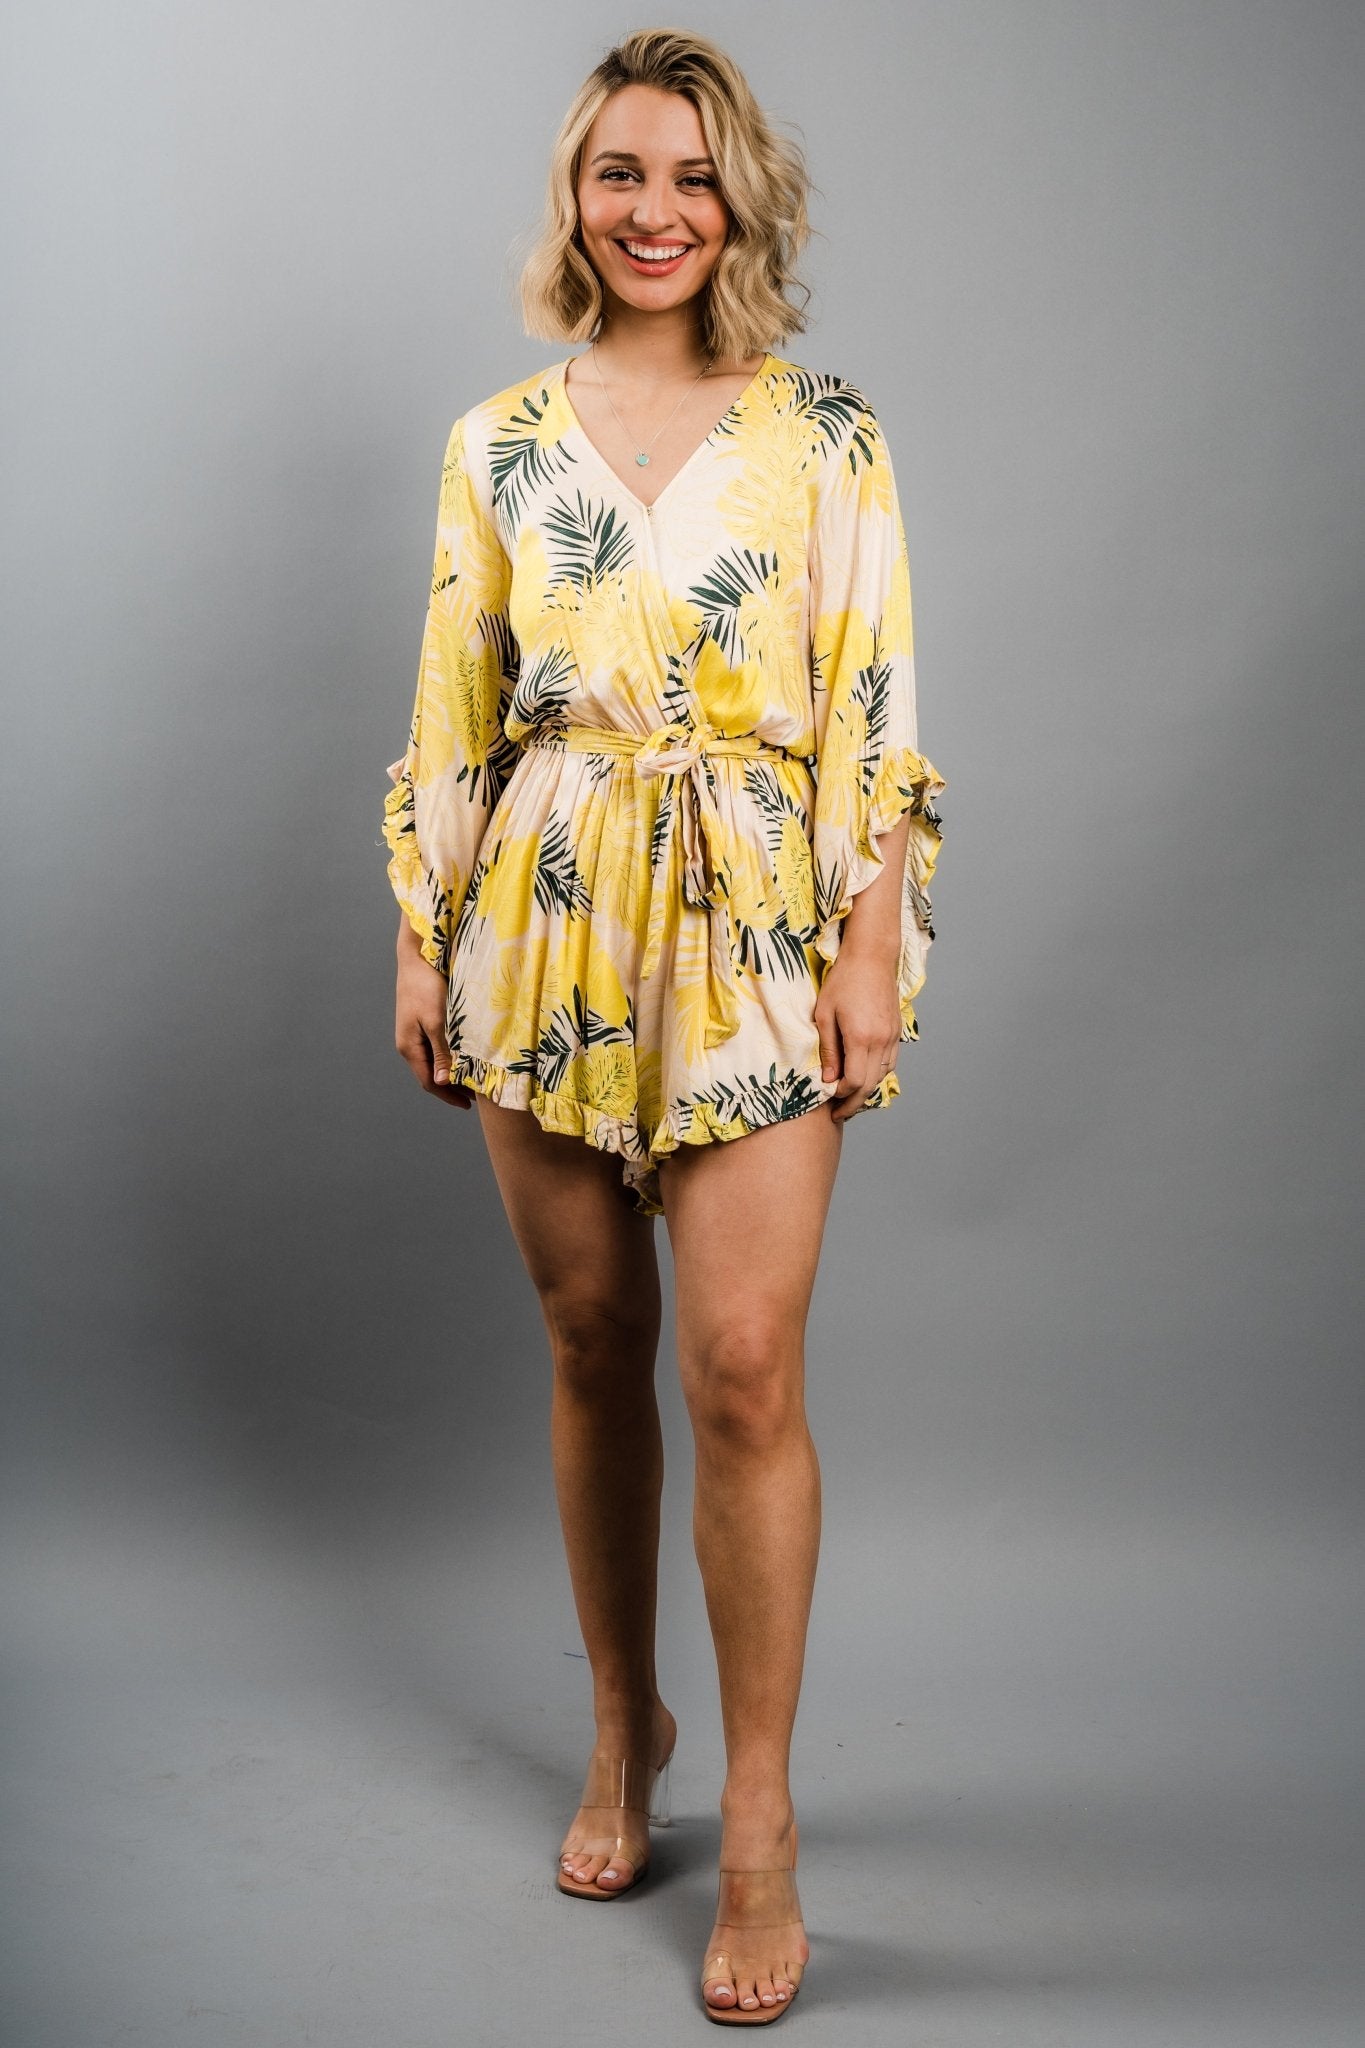 Ruffle tie waist tropical print romper apricot multi - Trendy Romper - Fashion Rompers & Pantsuits at Lush Fashion Lounge Boutique in Oklahoma City